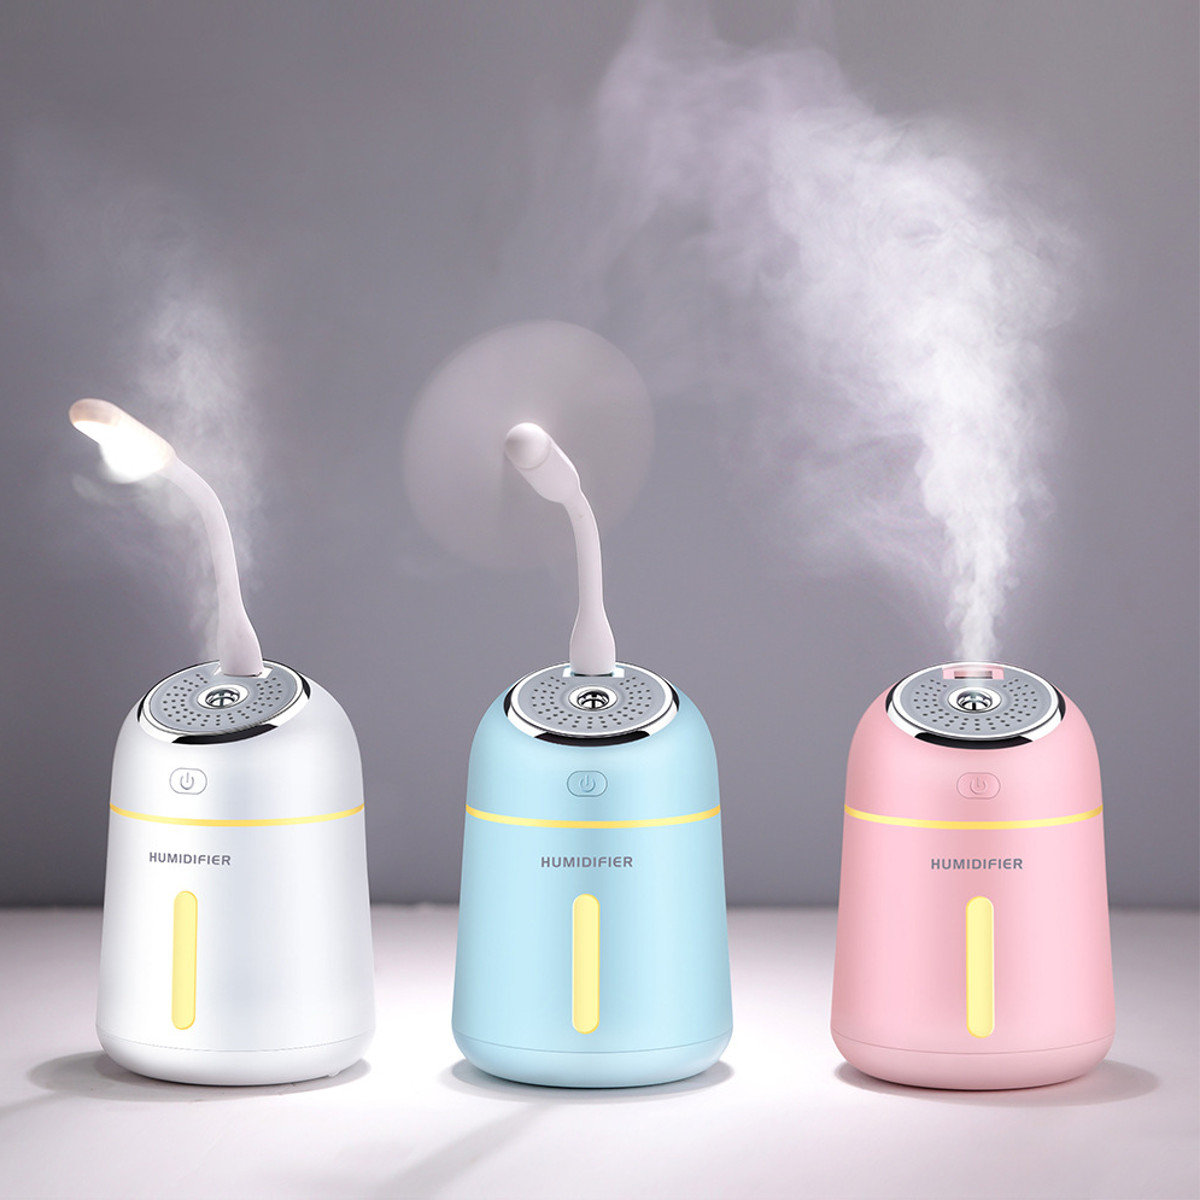 

4 In 1 Multi-Function Air Humidifier, Blue